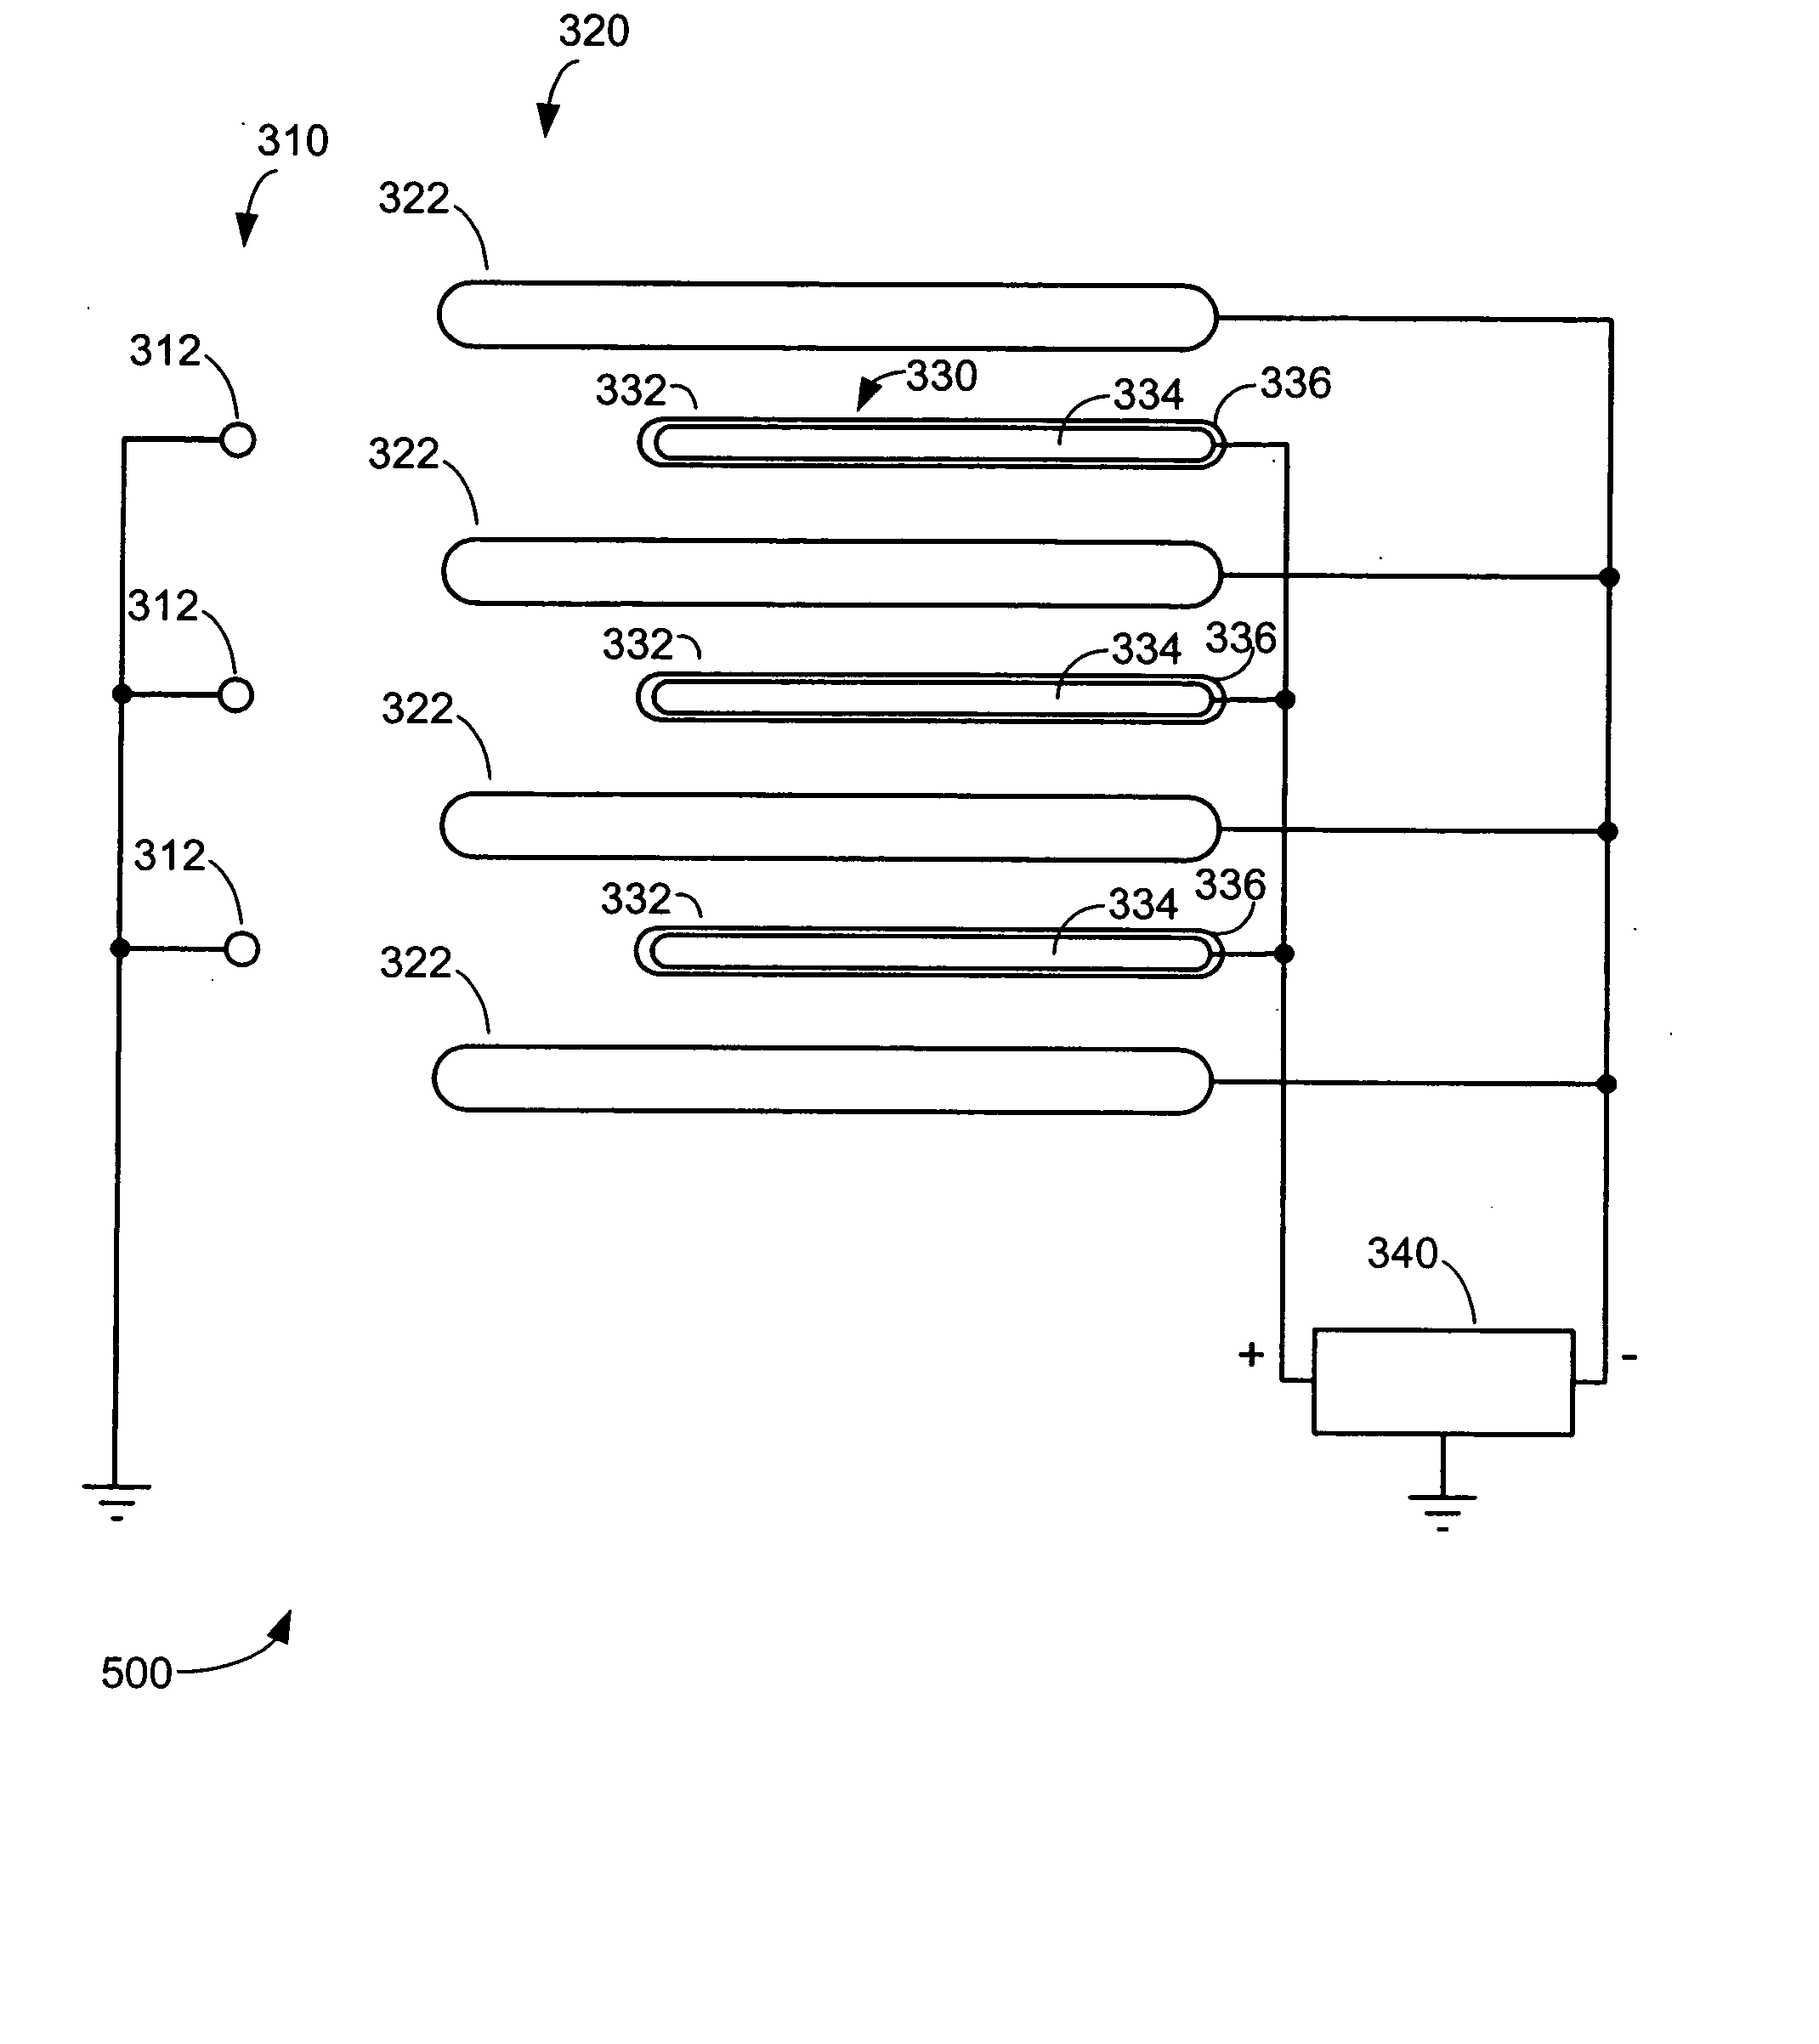 Electro-kinetic air transporter and conditioner devices with 3/2 configuration having driver electrodes